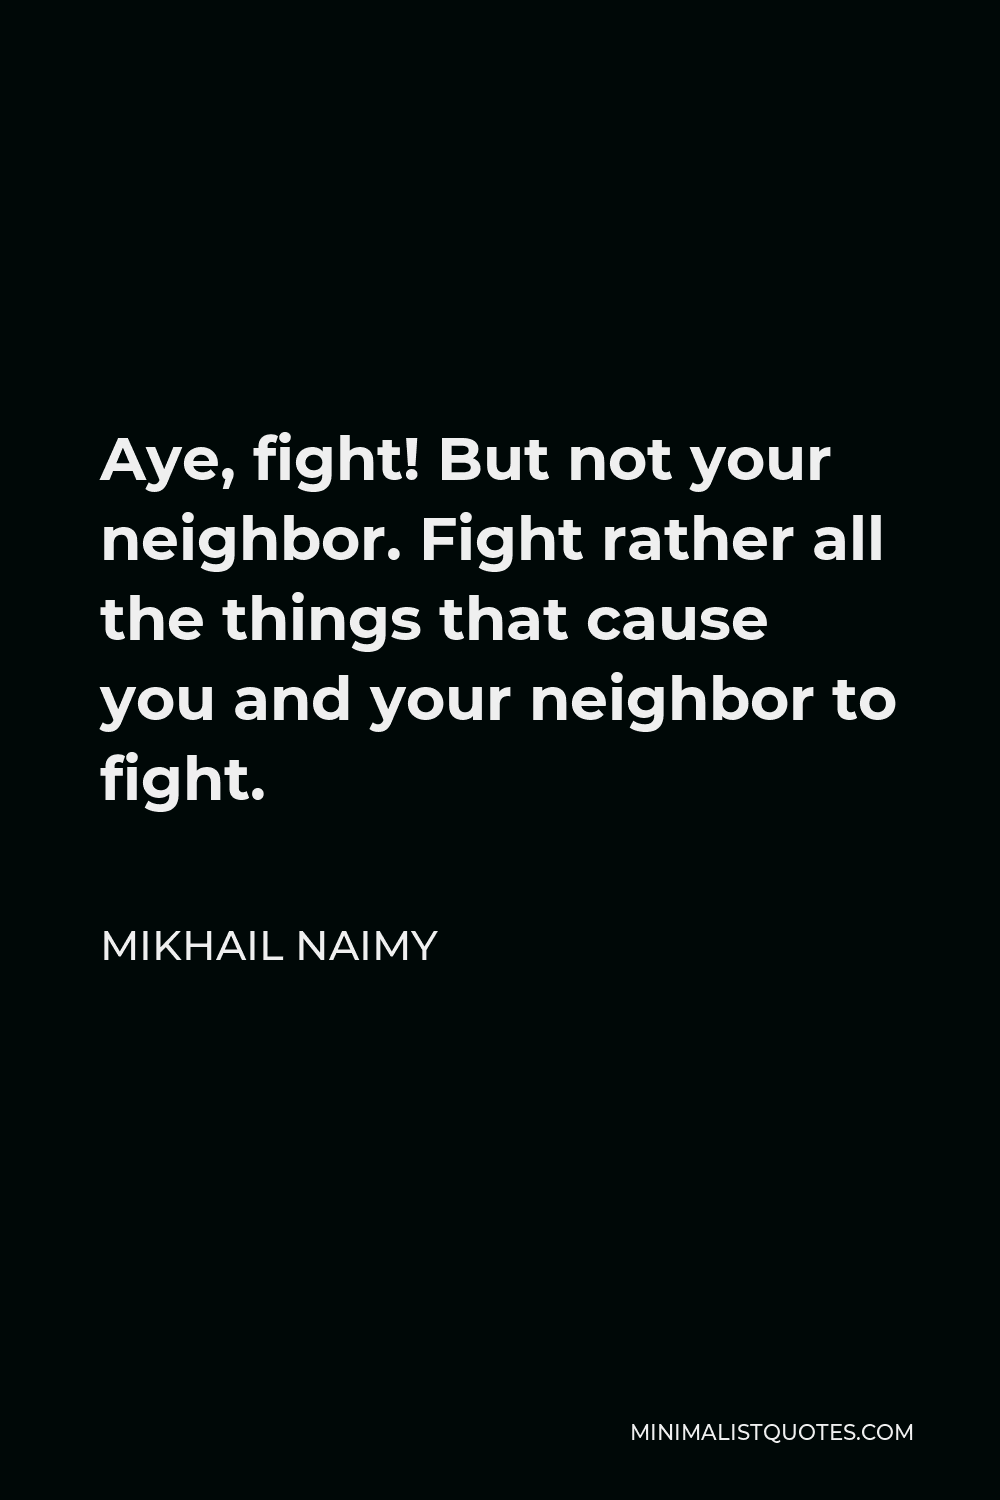 Mikhail Naimy Quote - Aye, fight! But not your neighbor. Fight rather all the things that cause you and your neighbor to fight.